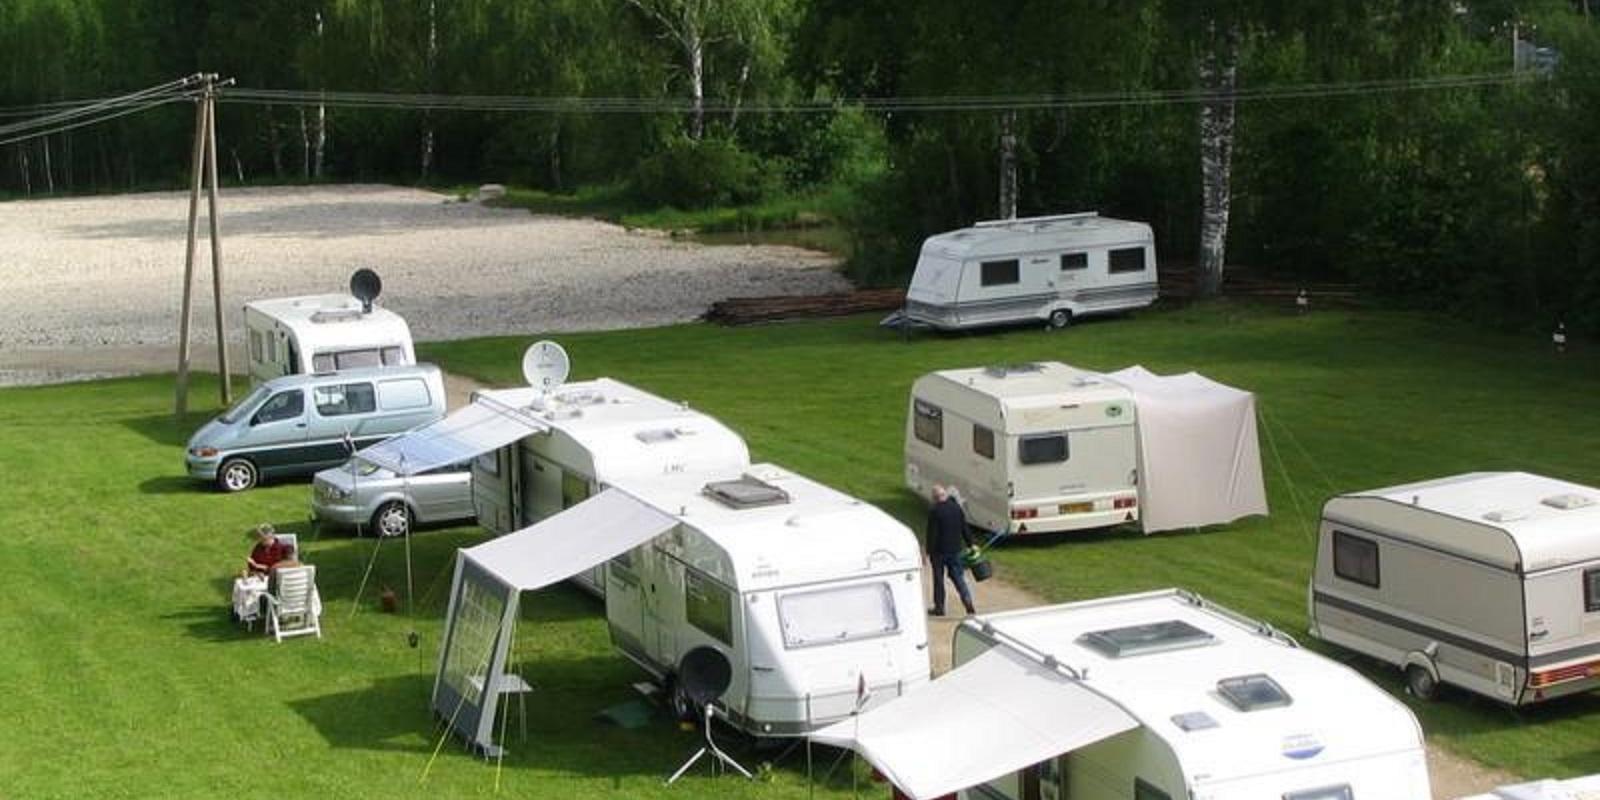 The camping site has places for 50 caravans. The total area of our caravan site is 2500 m². Every vehicle has access to one power outlet. For our gues